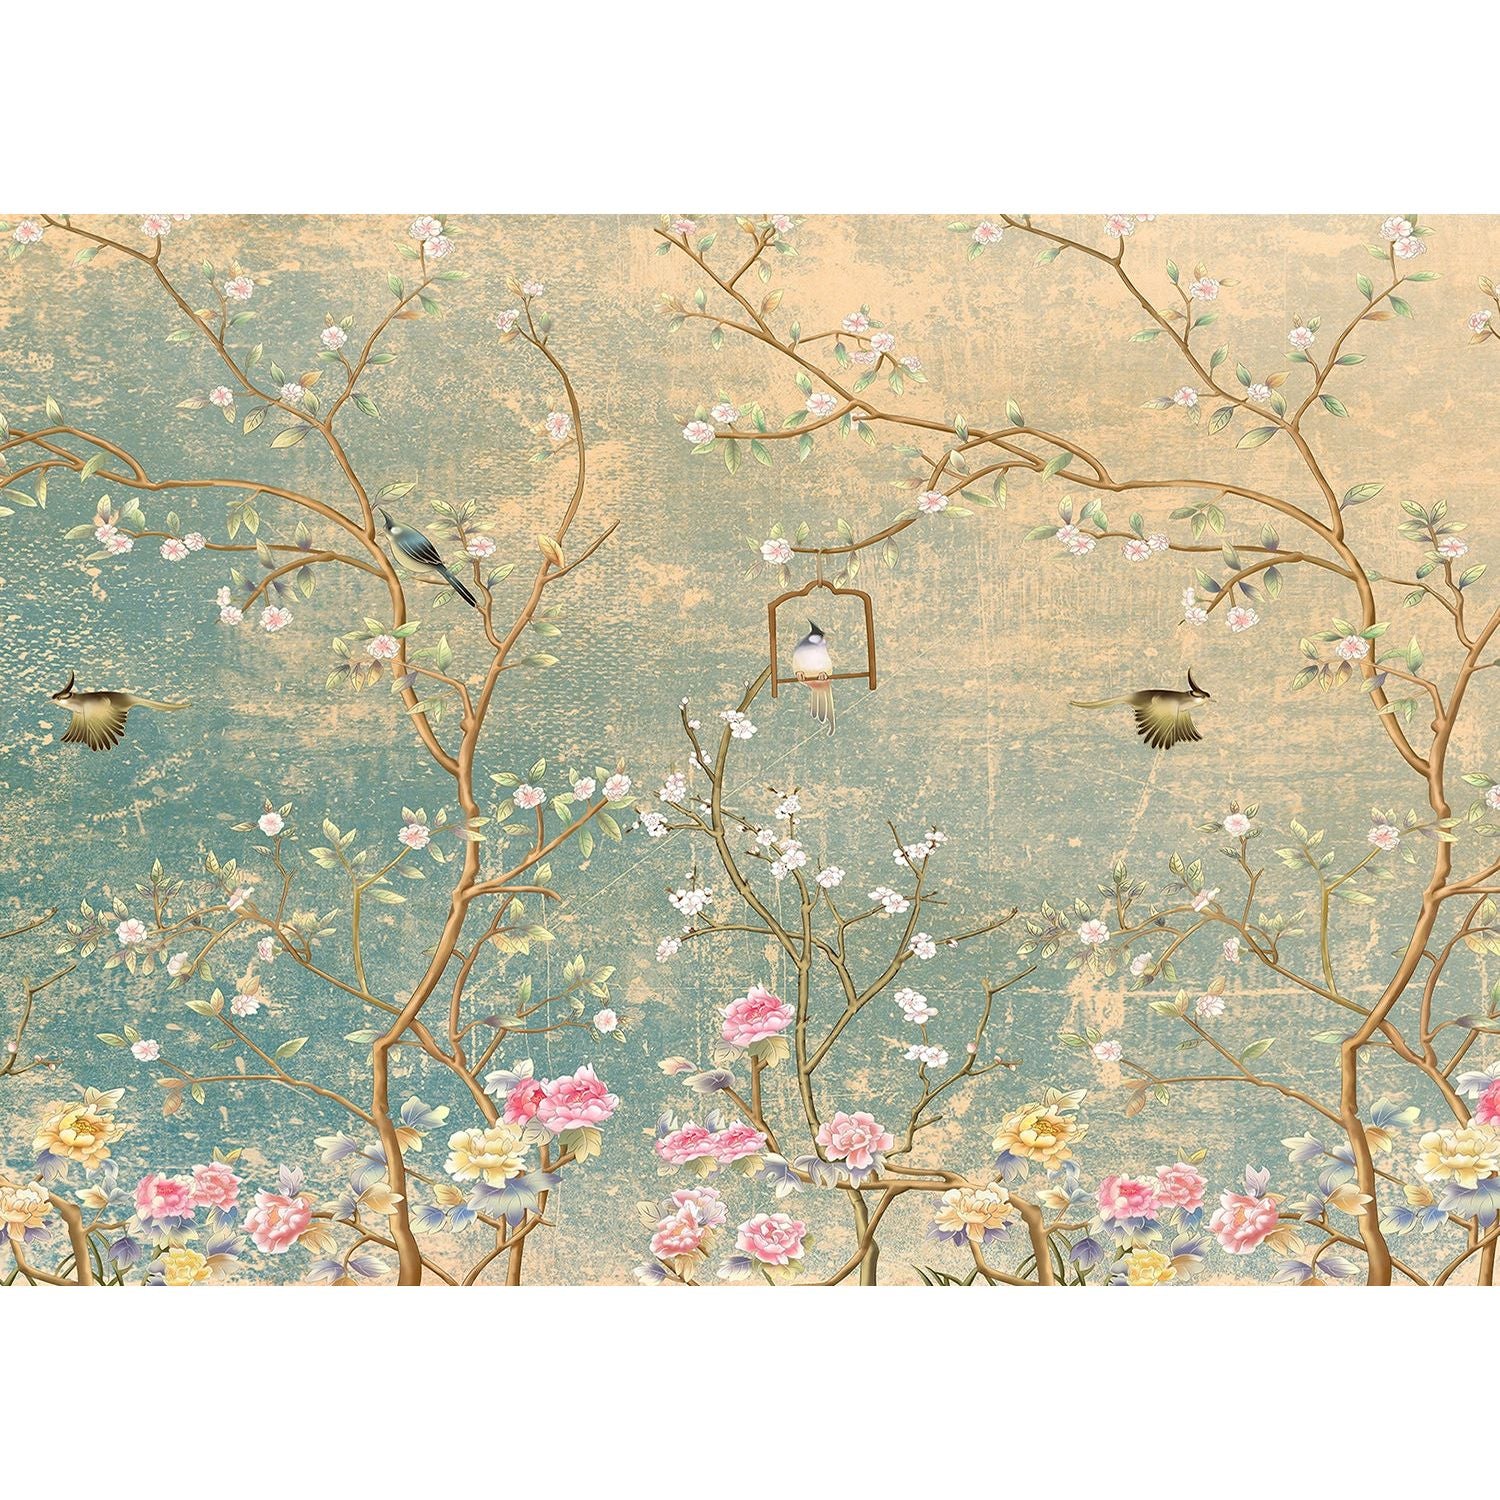 Sunlit Canopy: Blue & Yellow Branches & Birds Wall Mural